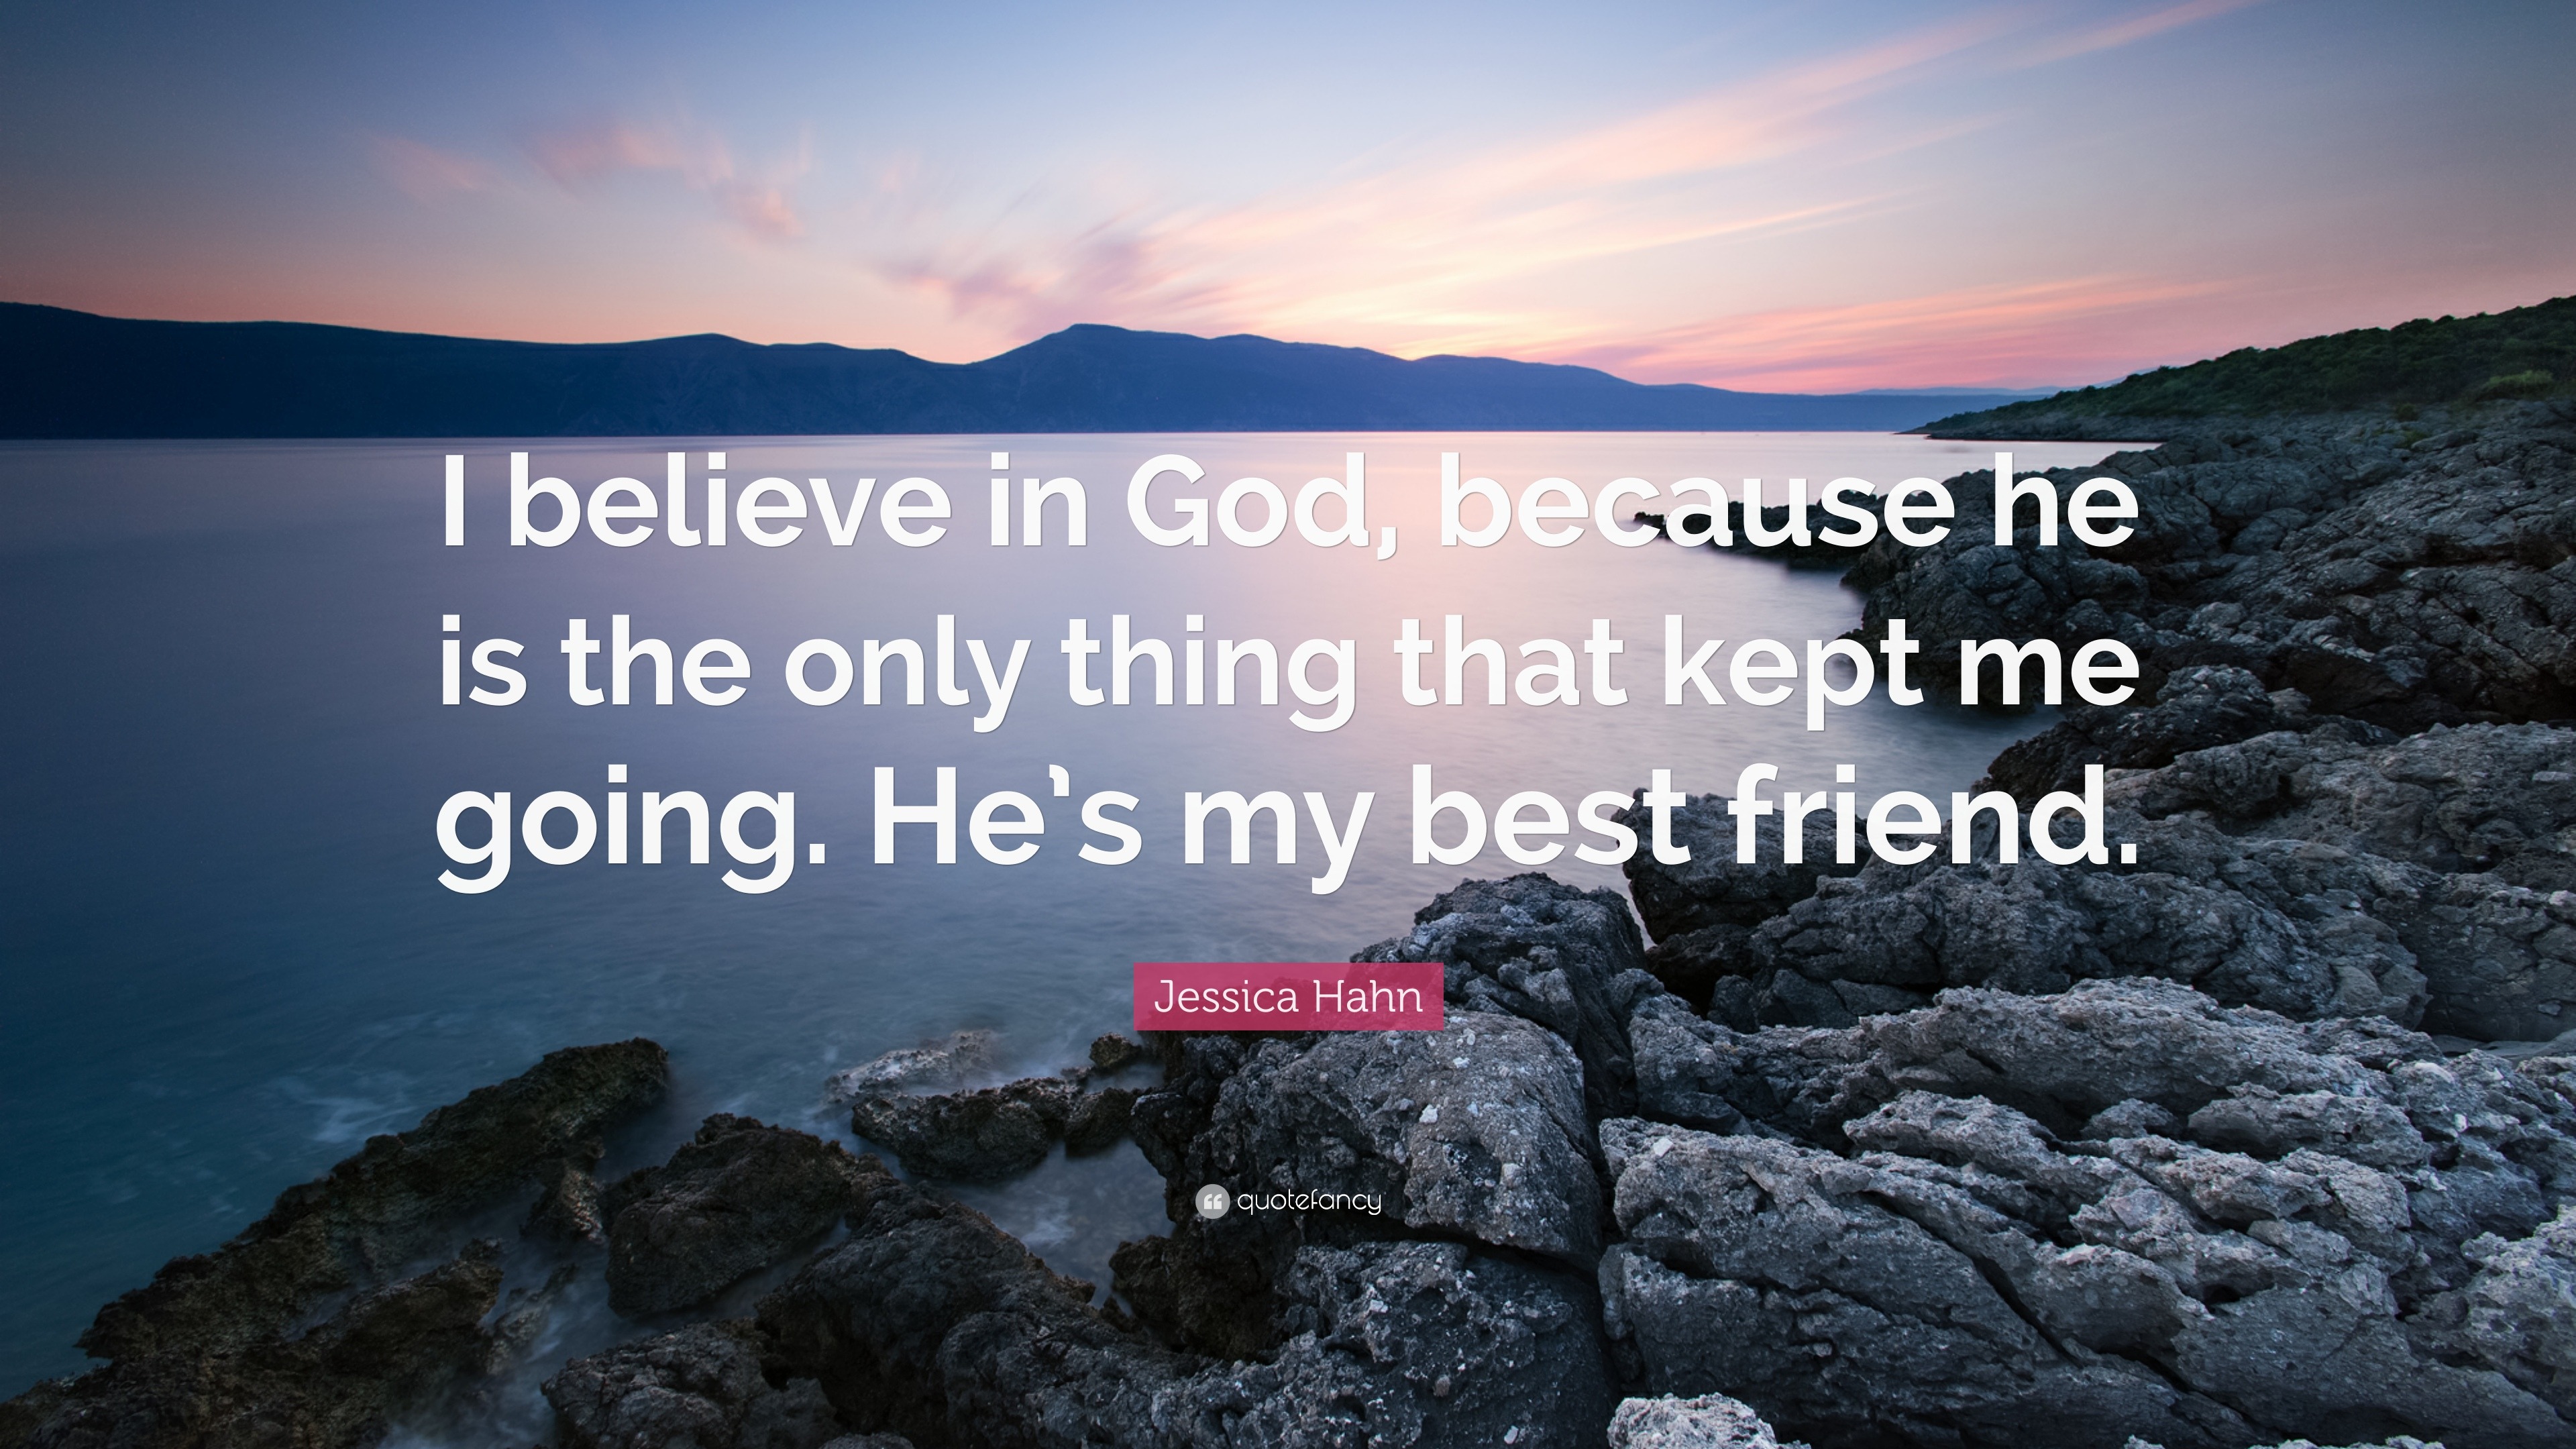 I believe in God, because he is the only thing that kept me going. He’s my best friend.